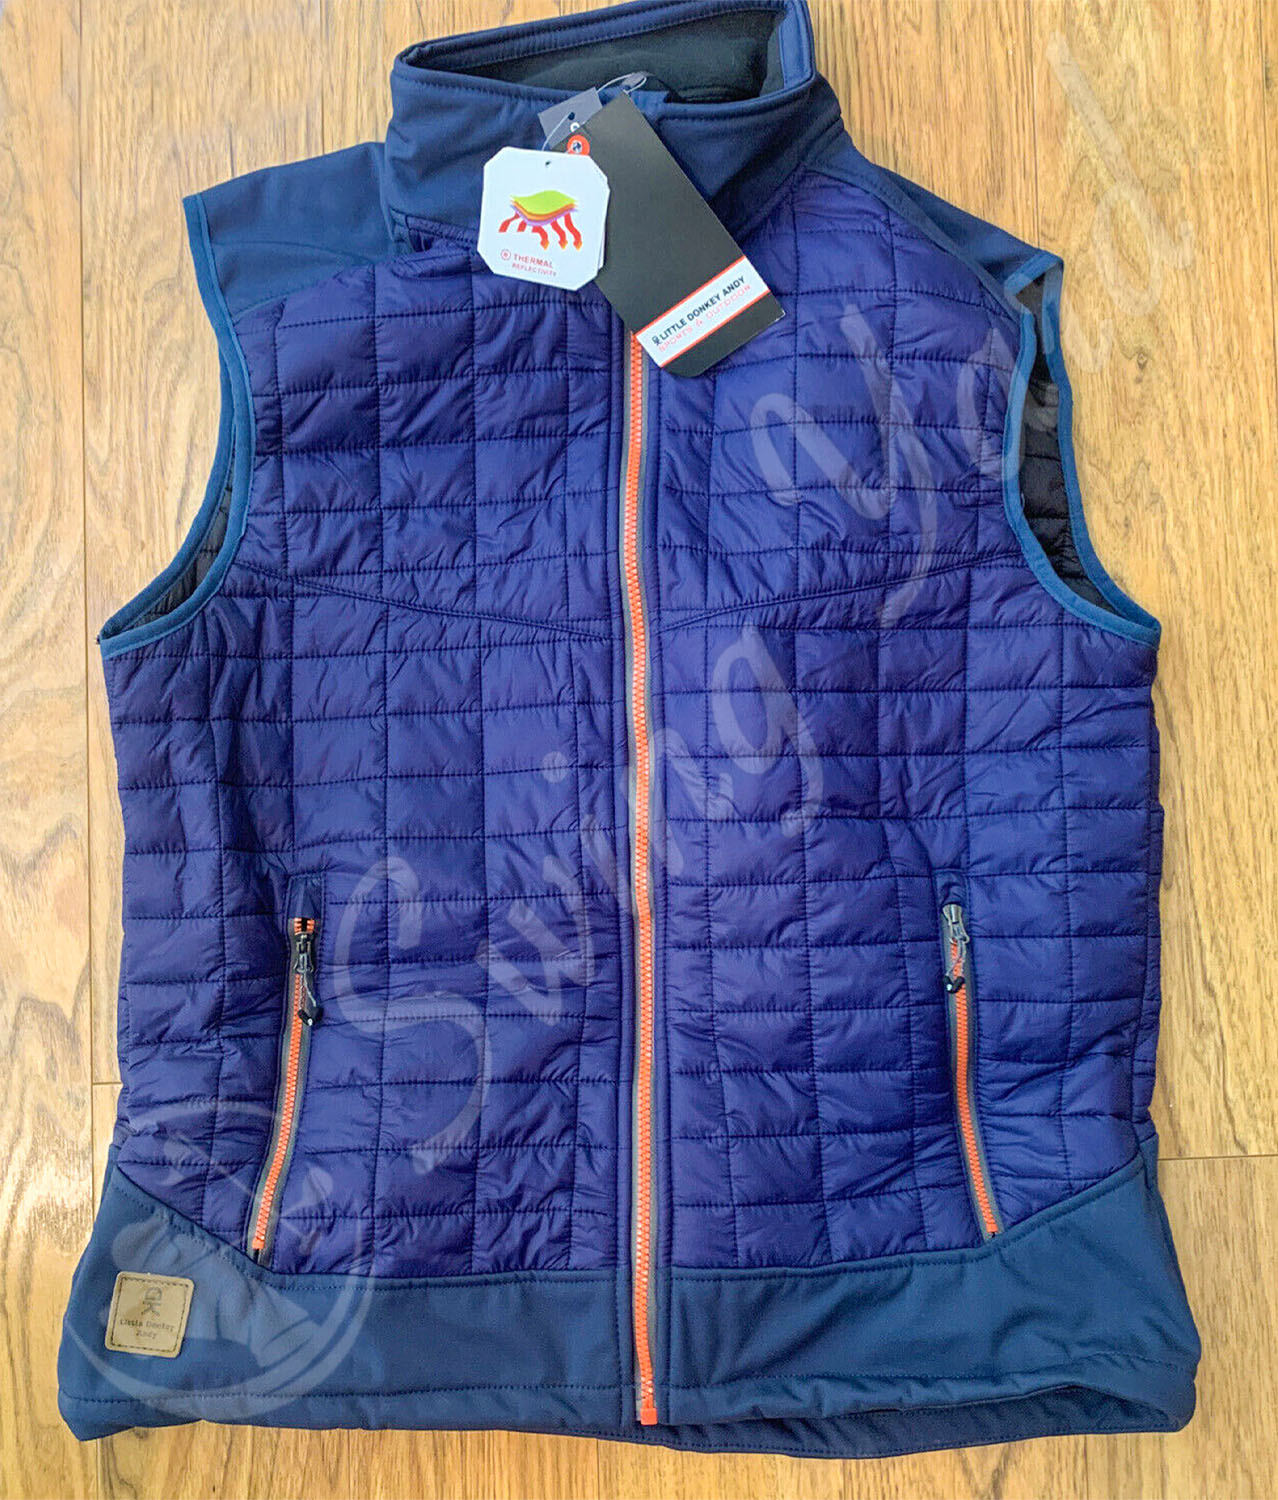 My new blue Little Donkey Andy lightweight puffer vest on the floor